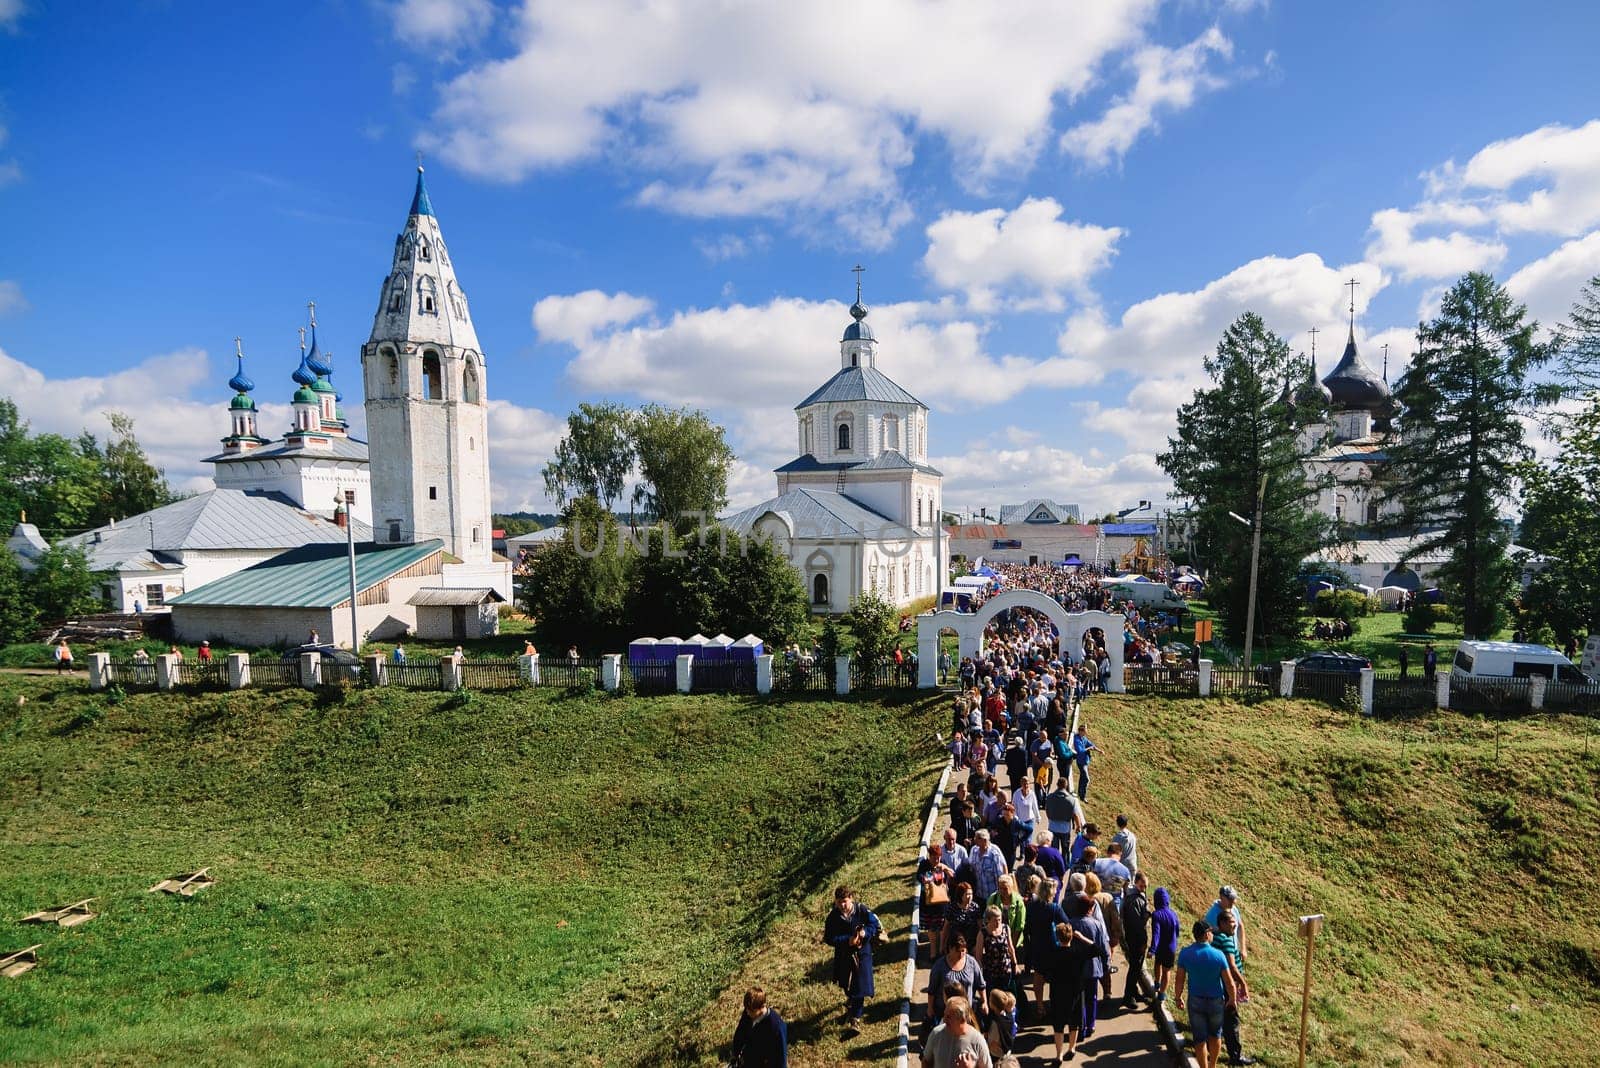 LUH, RUSSIA - AUGUST 27, 2016: Temple ensemble of the village of Luh with tourists on the holiday of Onion day, Russia